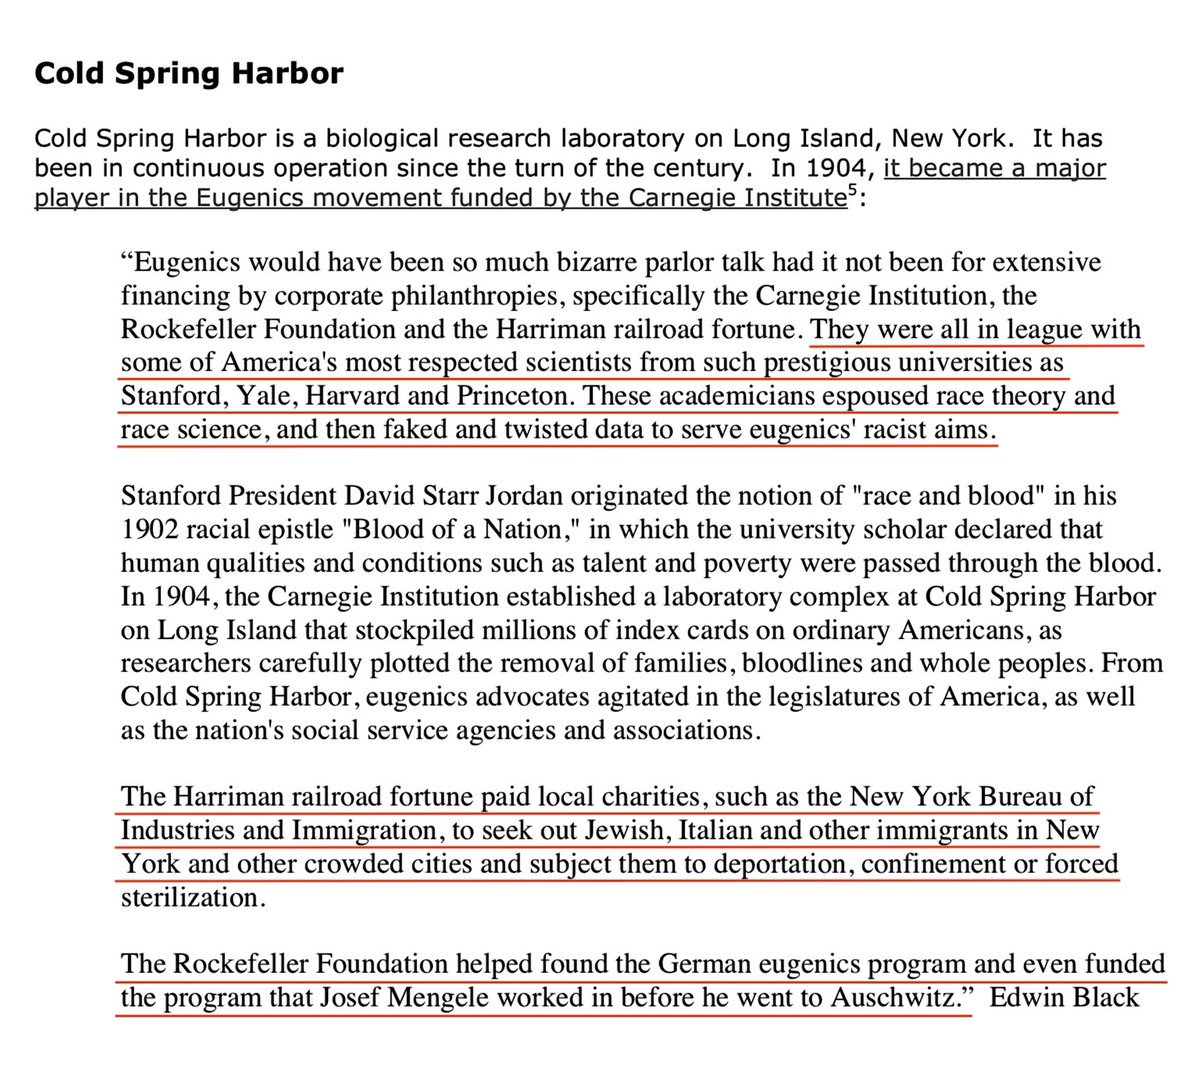 The Early Days Of Eugenics Received Extensive Financing By Corporate Philanthropies, Specifically The Carnegie Institution, The Rockefeller Foundation And The Harriman Railroad Fortune. http://www.channelingreality.com/Genome/Human_Genome_Project_Rel1.pdf #QAnon  #Eugenics  #Genome  #ColdSpringHarbor  @potus